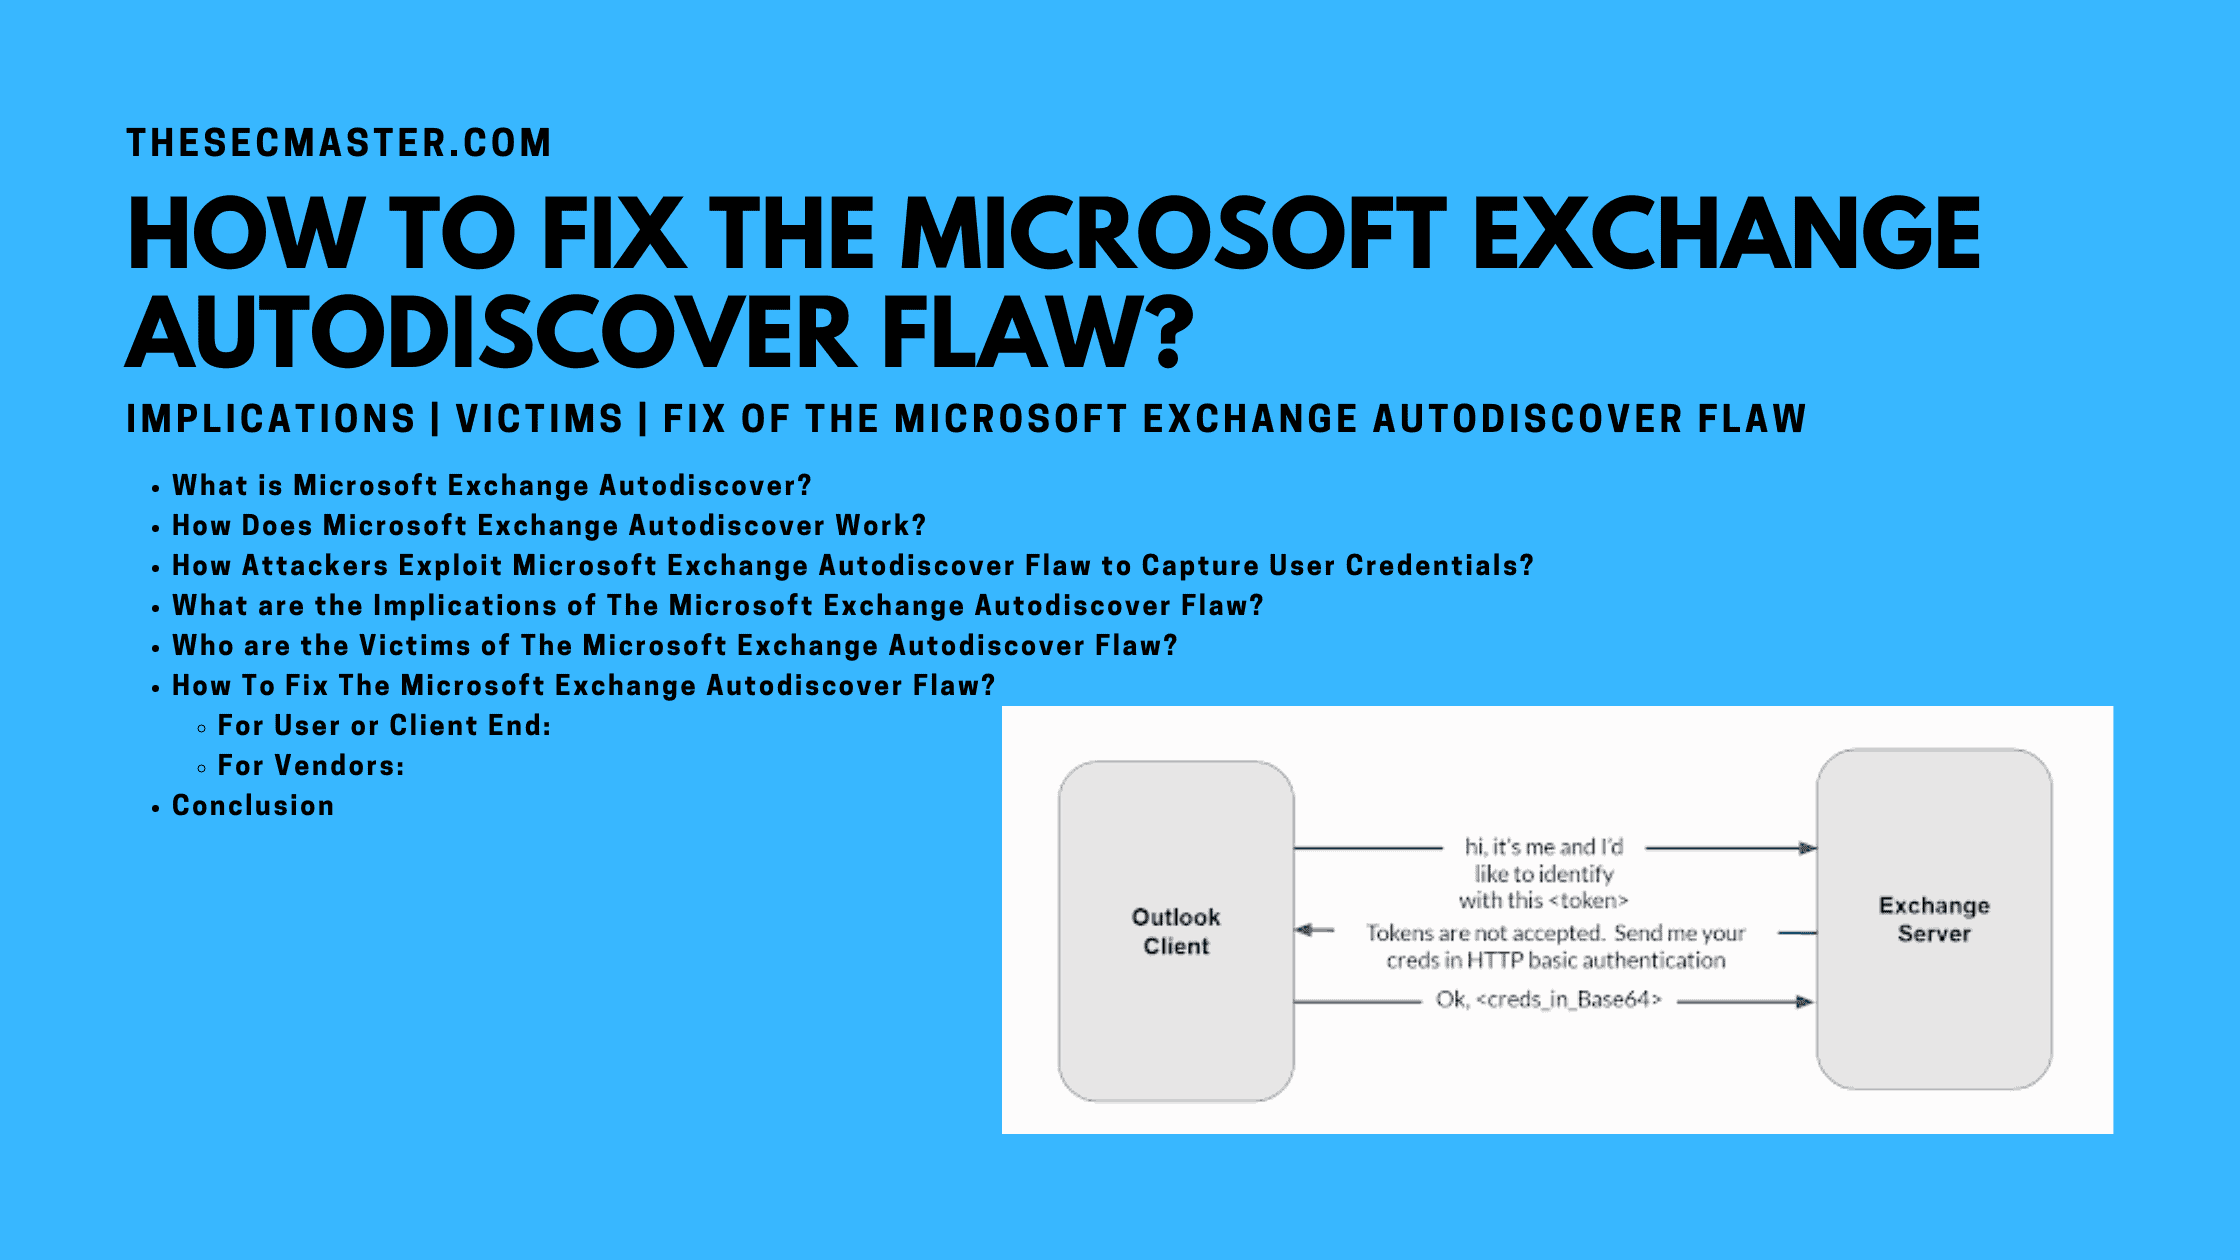 How To Fix The Microsoft Exchange Autodiscover Flaw